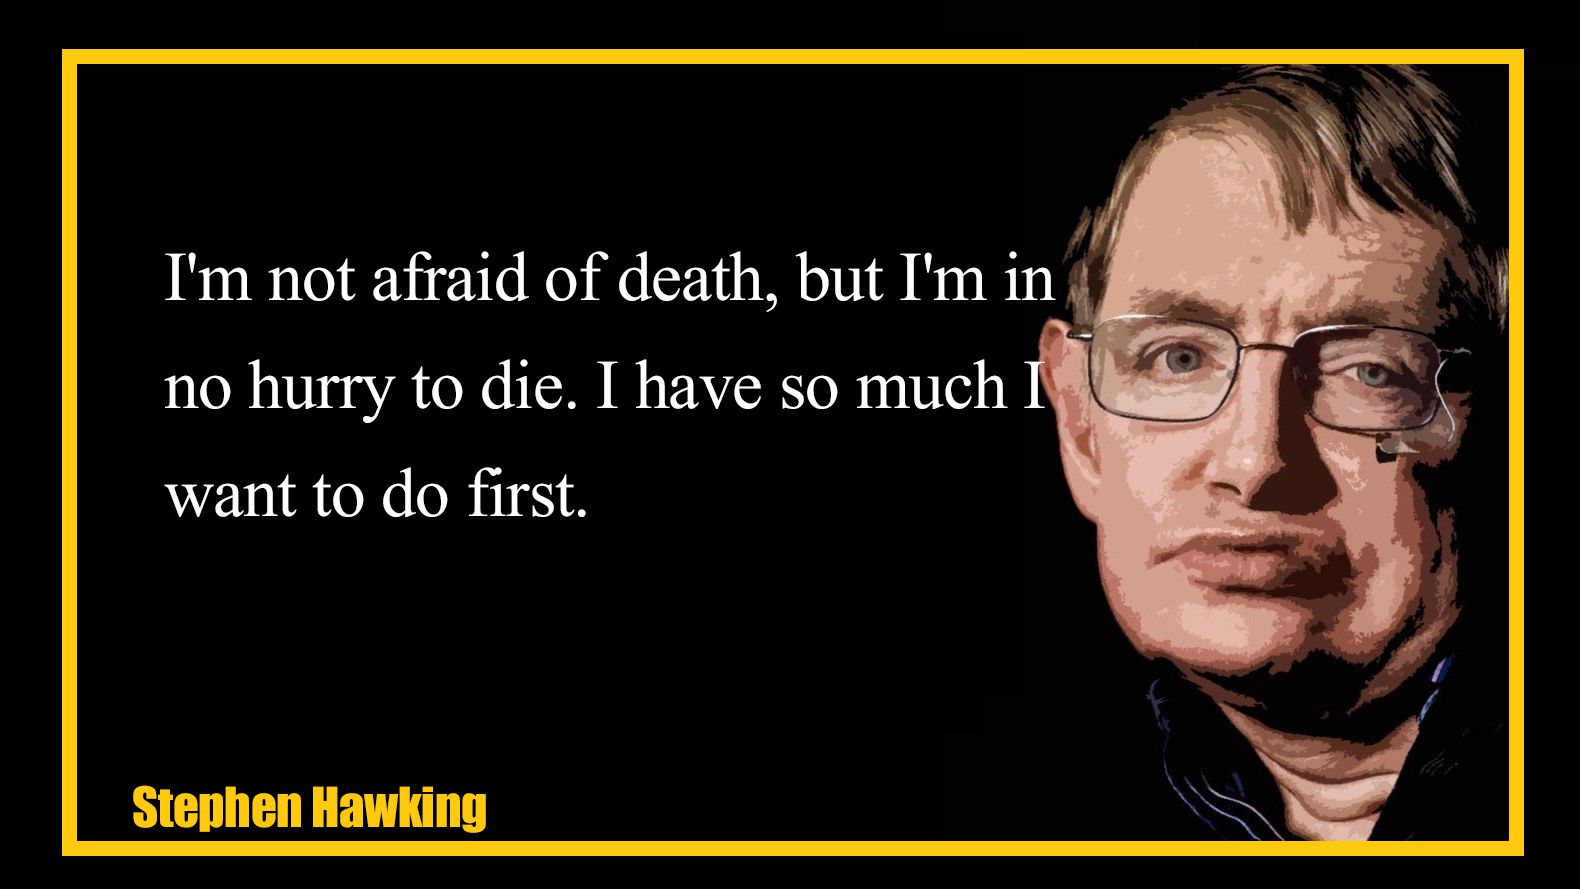 Stephen Hawking - Not only does God play dice, but he